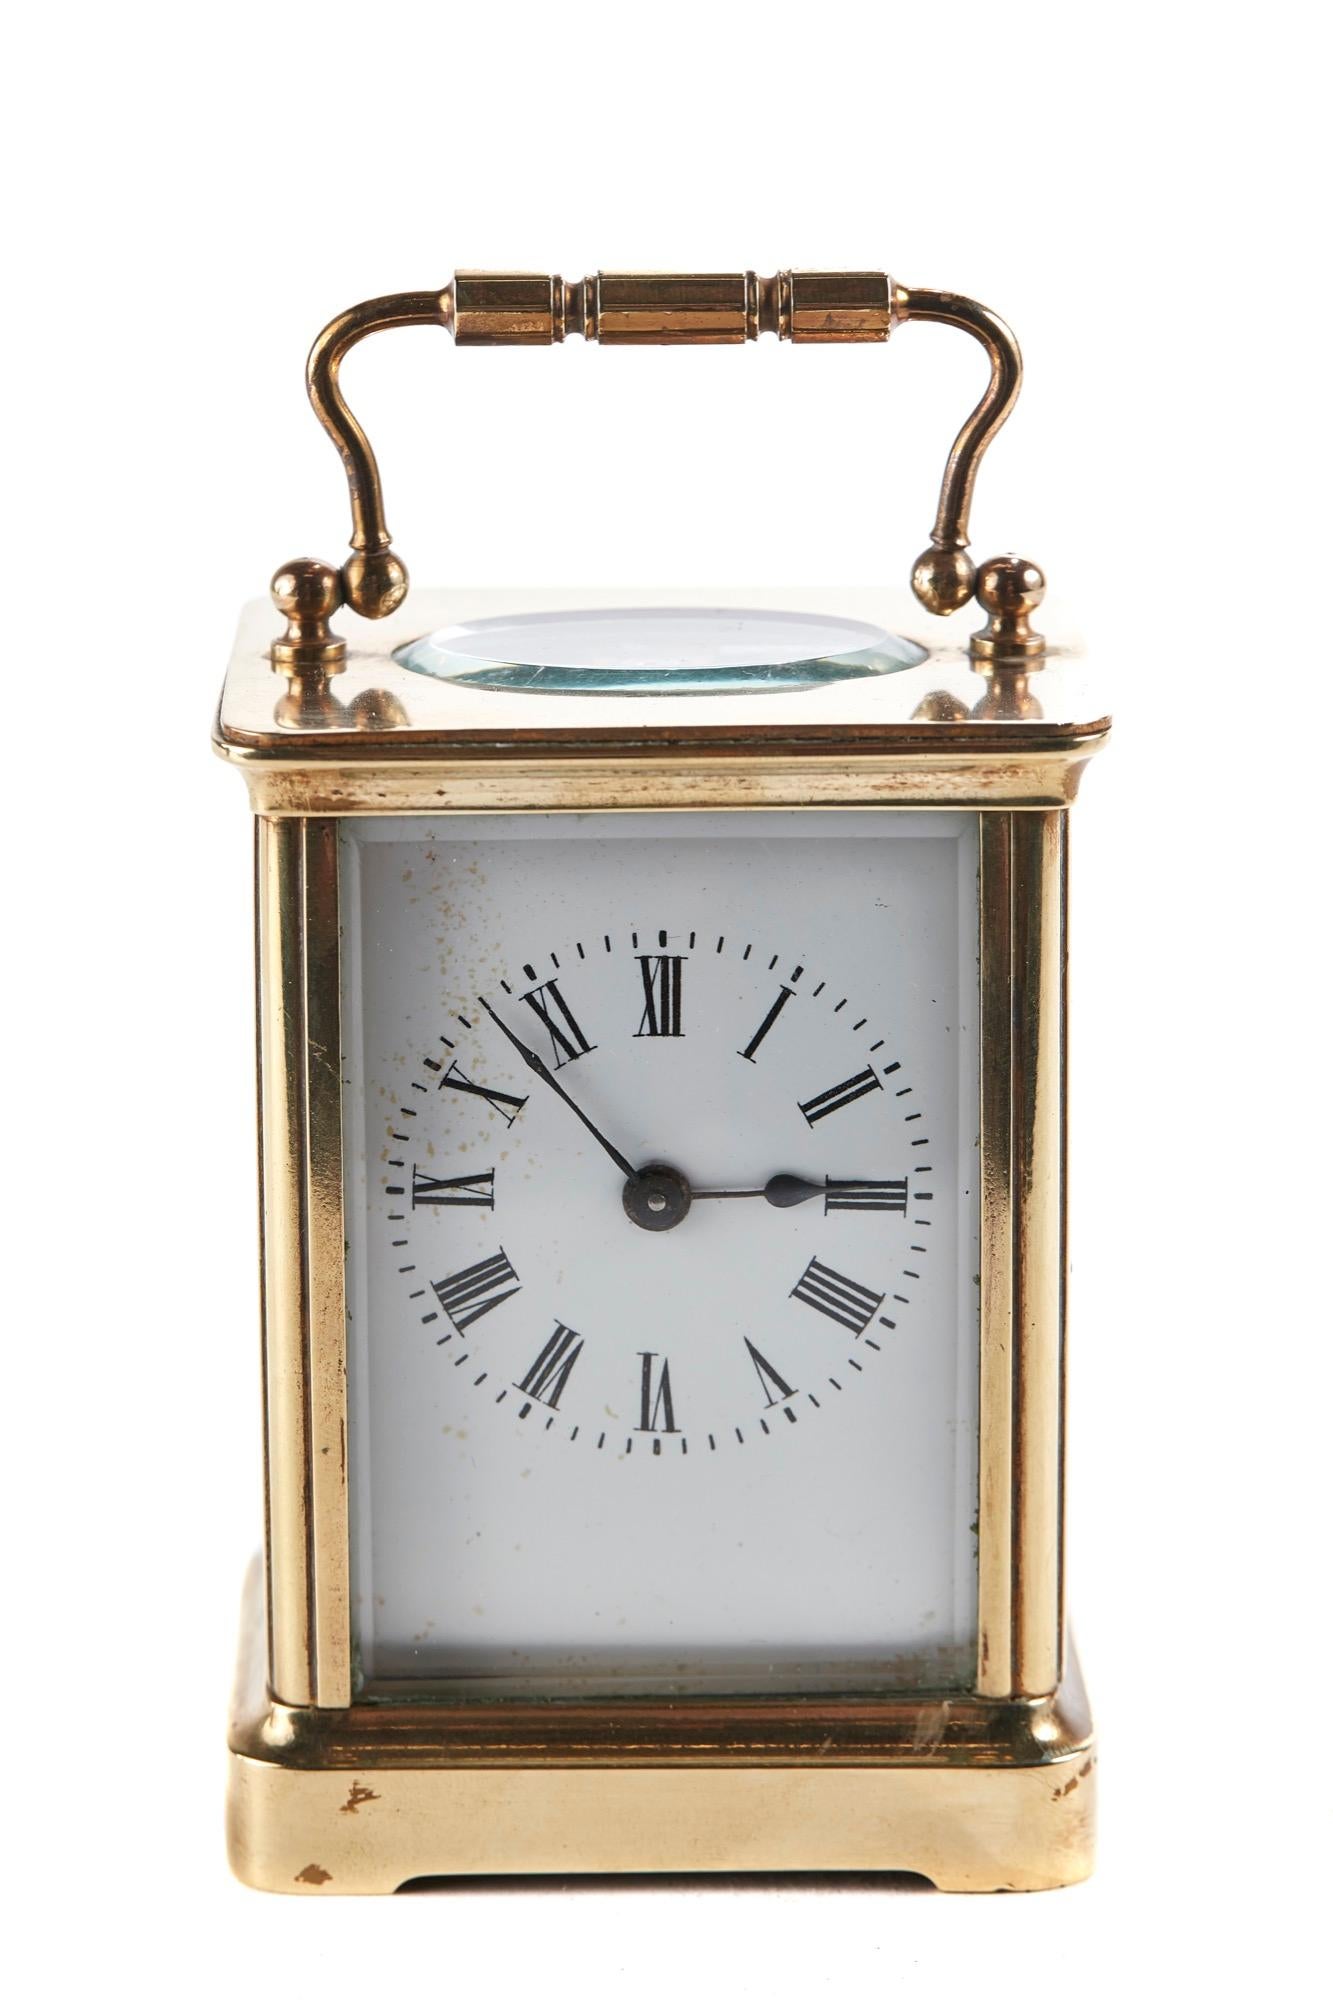 This is an antique brass carriage clock with shaped handle, bevelled glass, enameled dial, 8 day French movement. It is in perfect working order.